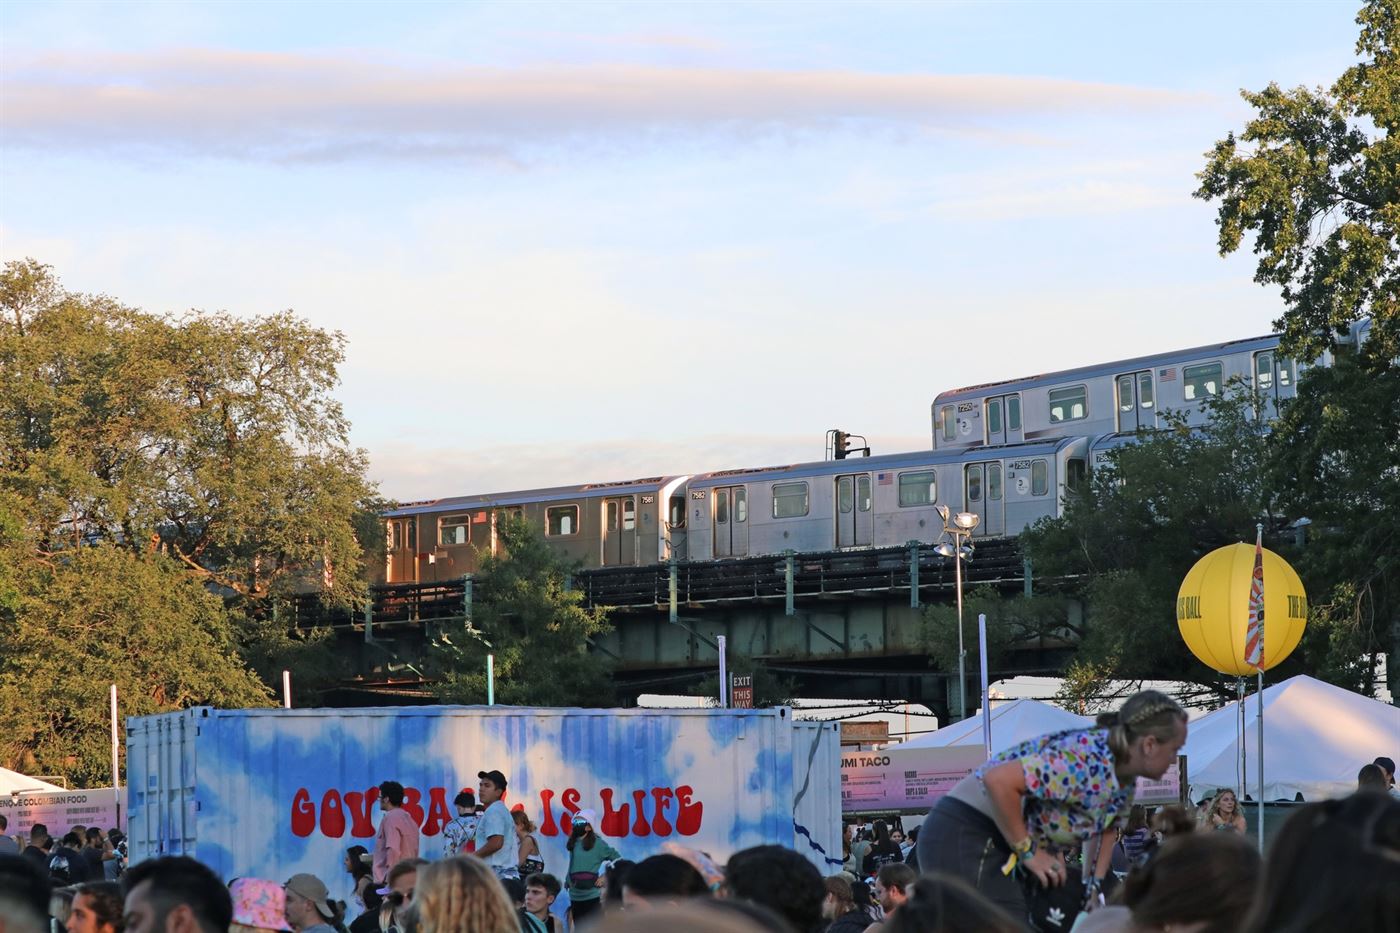 The 7 Train passes above resting festival-goers. Photo courtesy of Julian Rigg